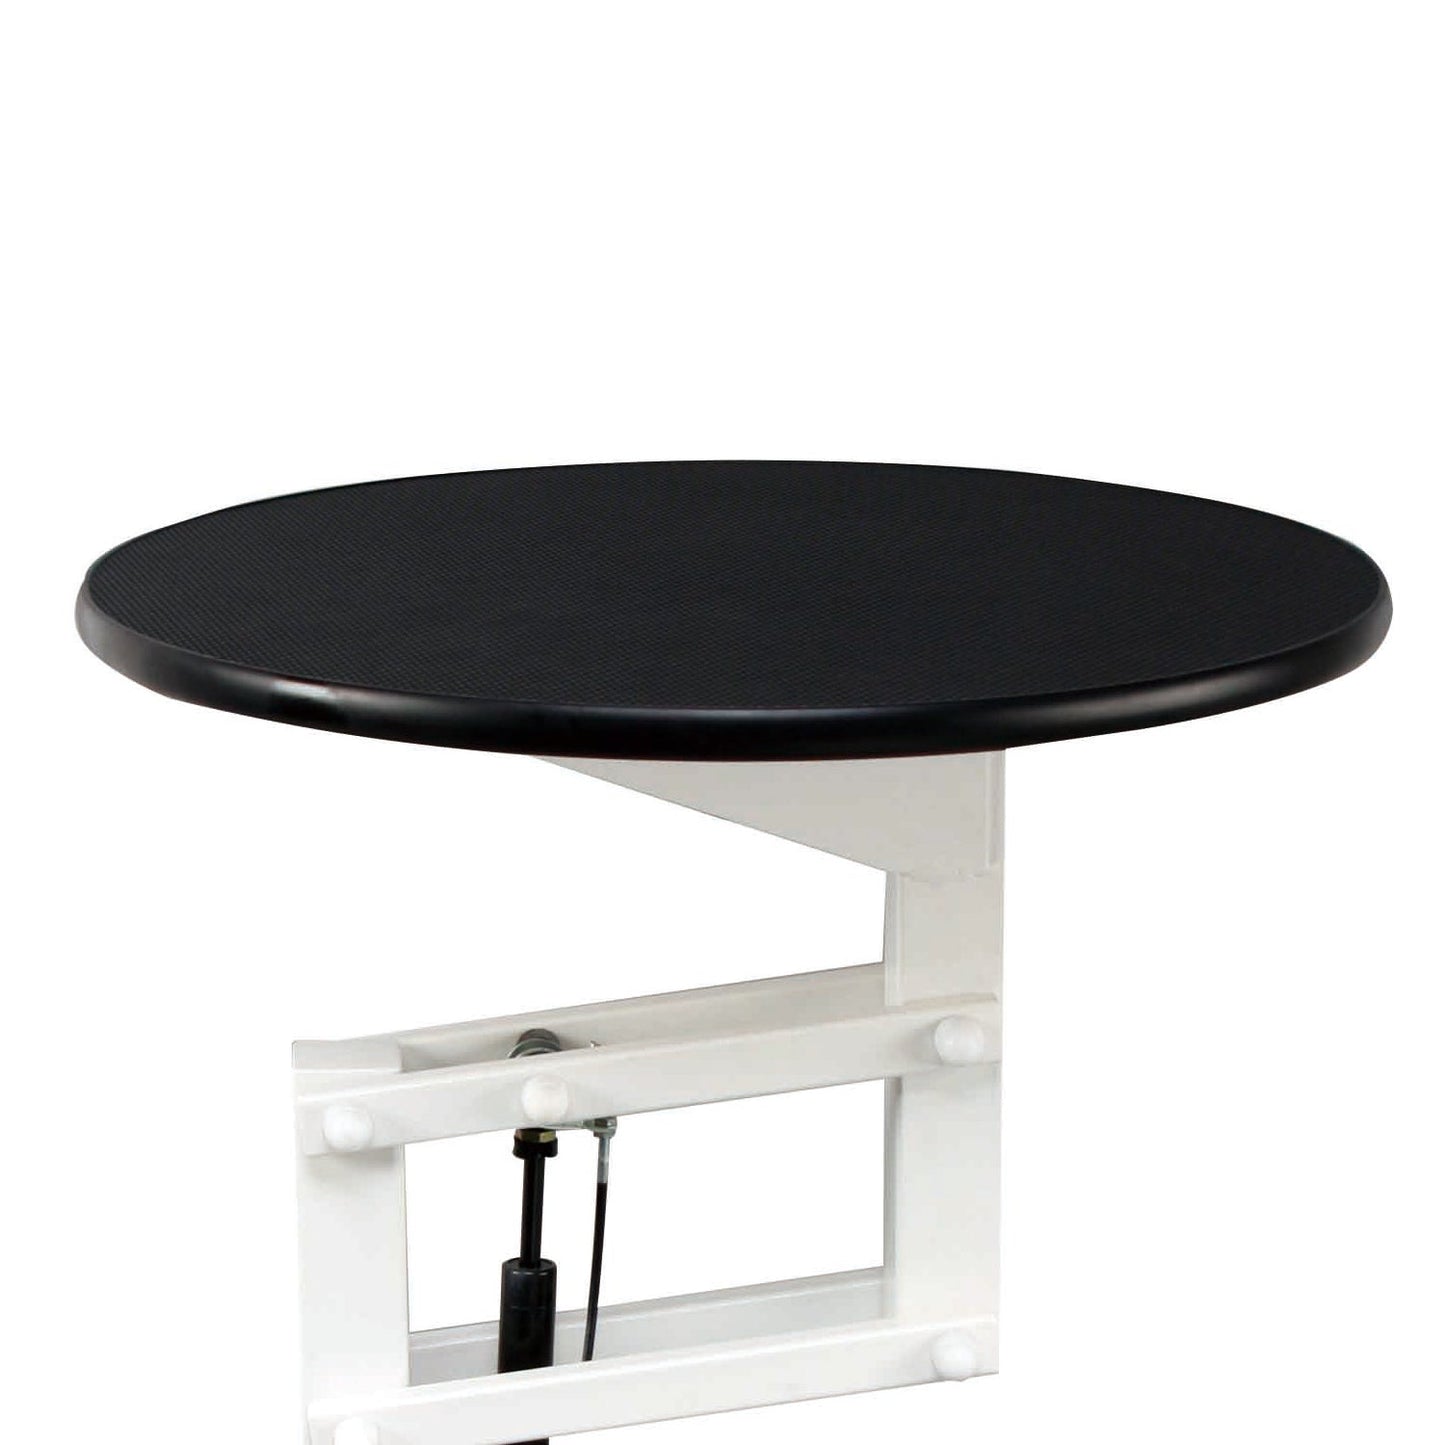 Aeolus Air Spring Table with Rotational Top-Grooming Tables-Pet's Choice Supply